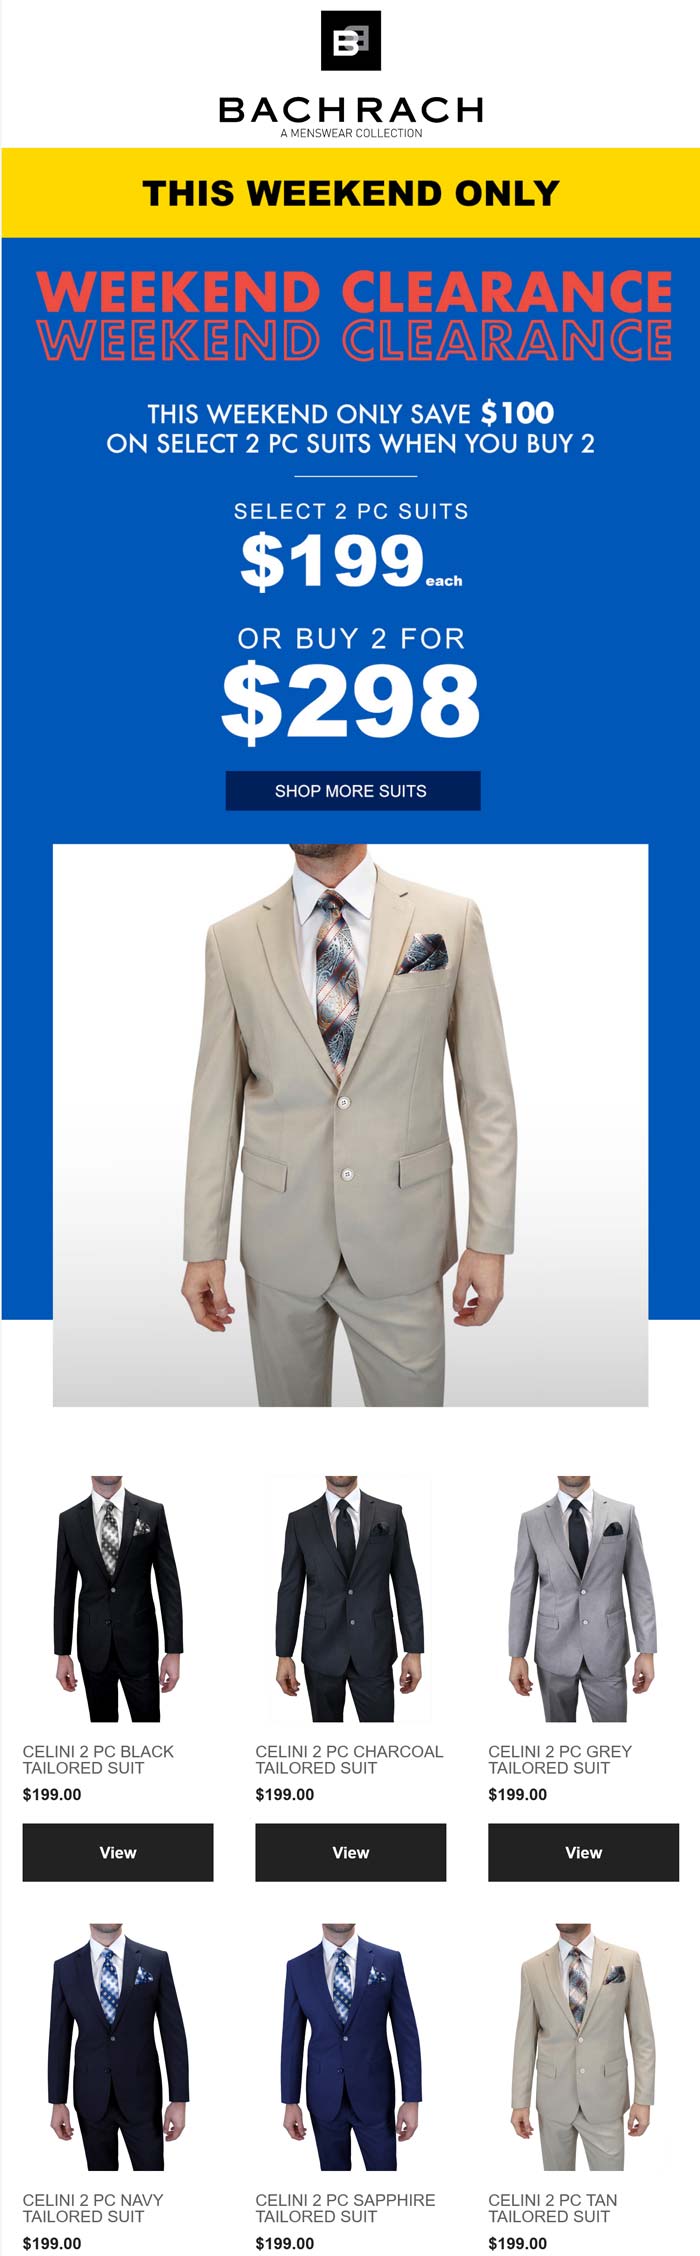 Bachrach stores Coupon  2 suits for $298 today at Bachrach menswear #bachrach 